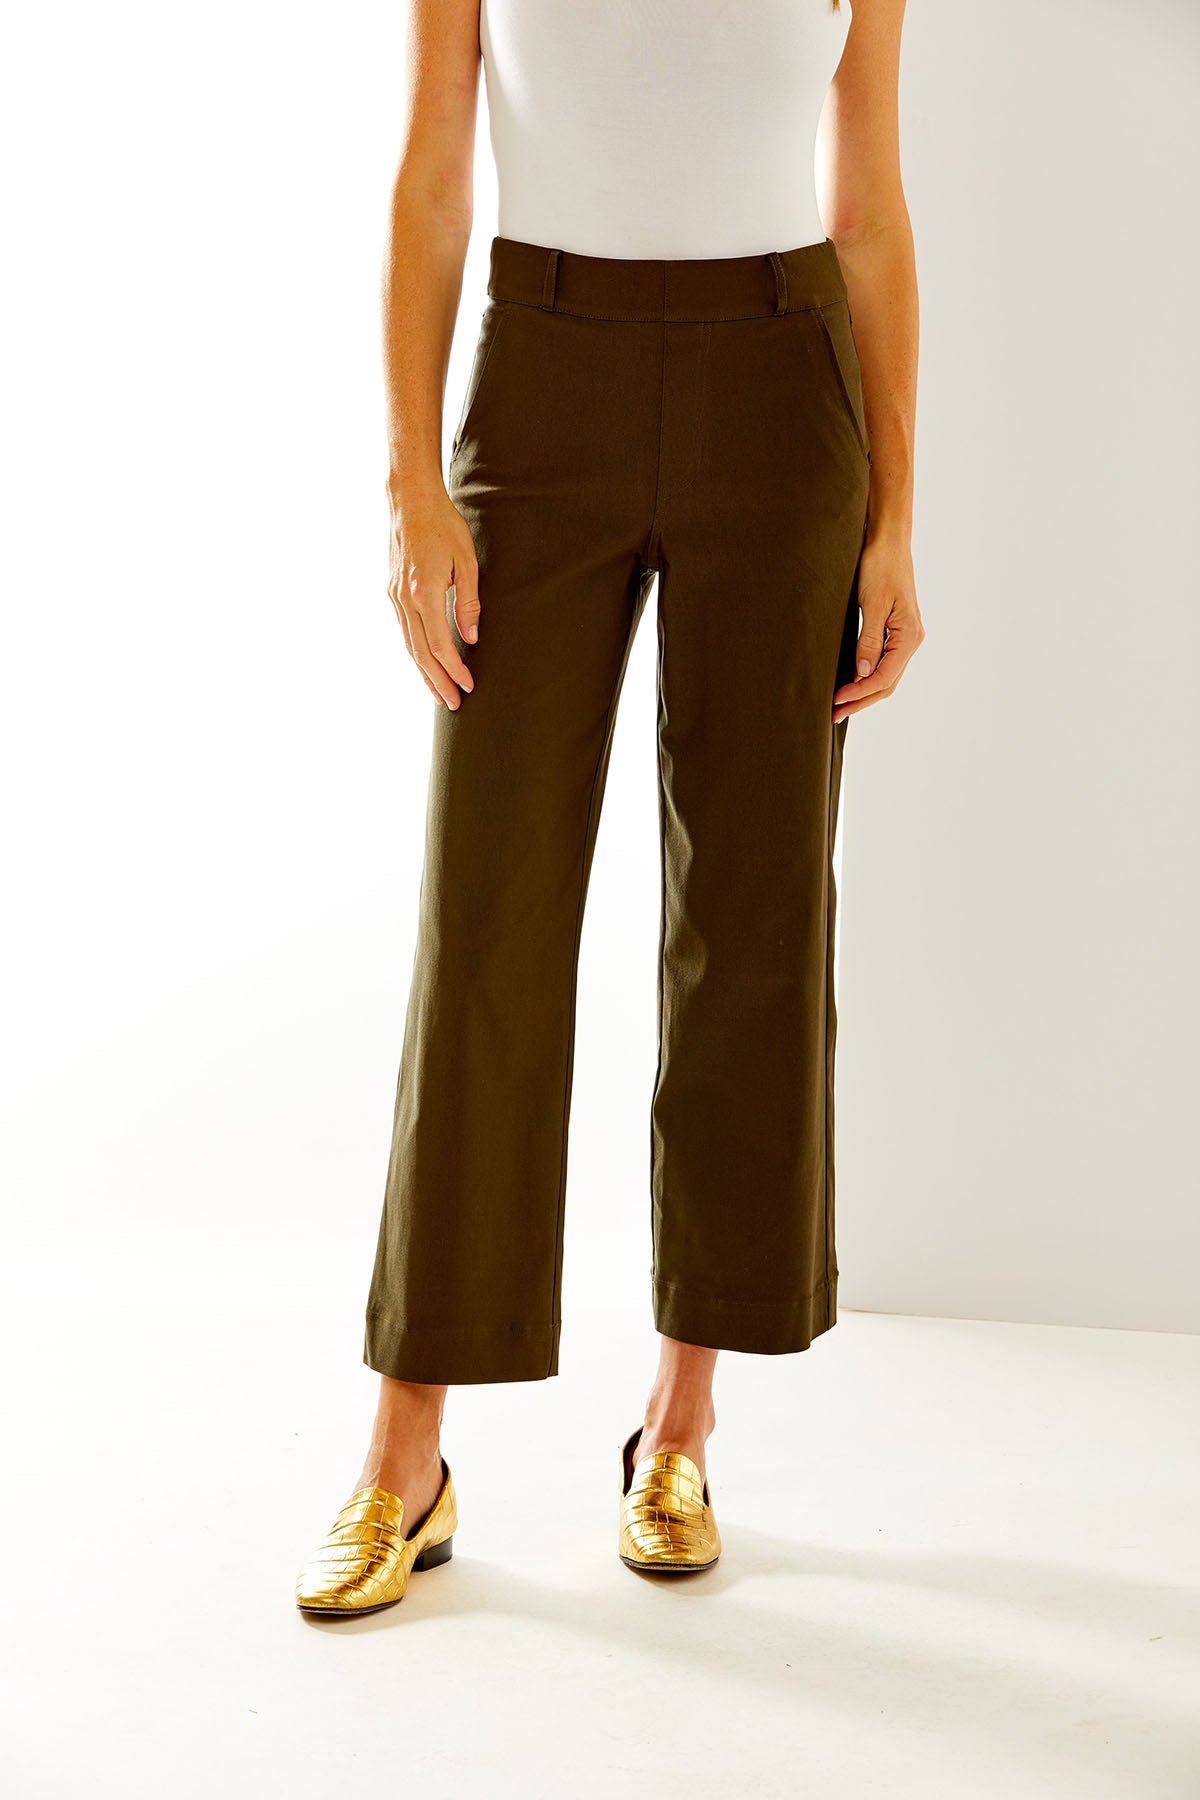 Woman in olive pants